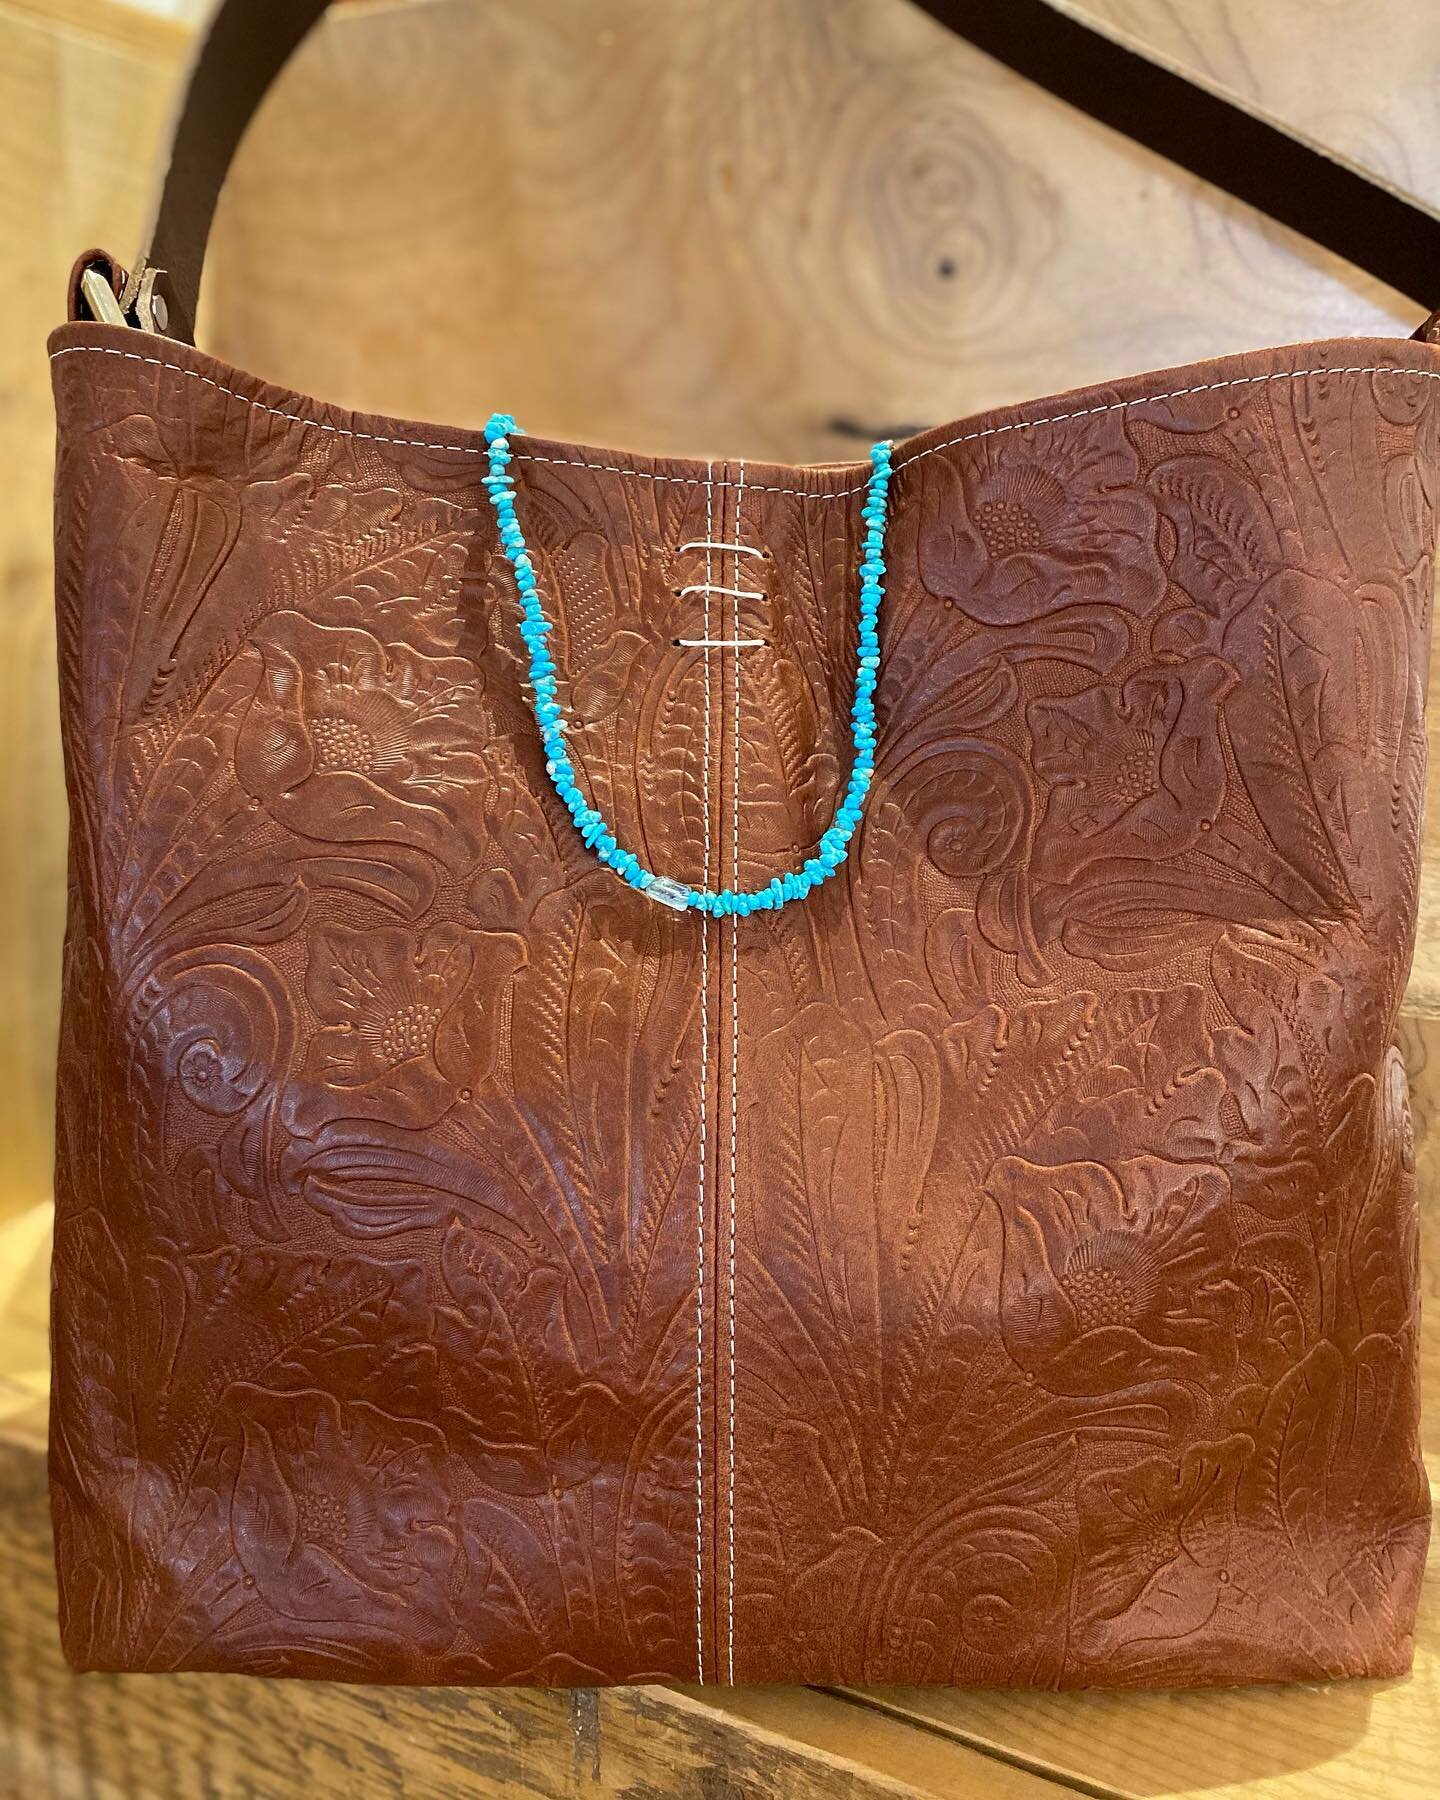 A big beautiful #cinder bag with @buchanjewelry turquoise necklace draped over the collar.  I love brown and turquoise together! @riversidestudios